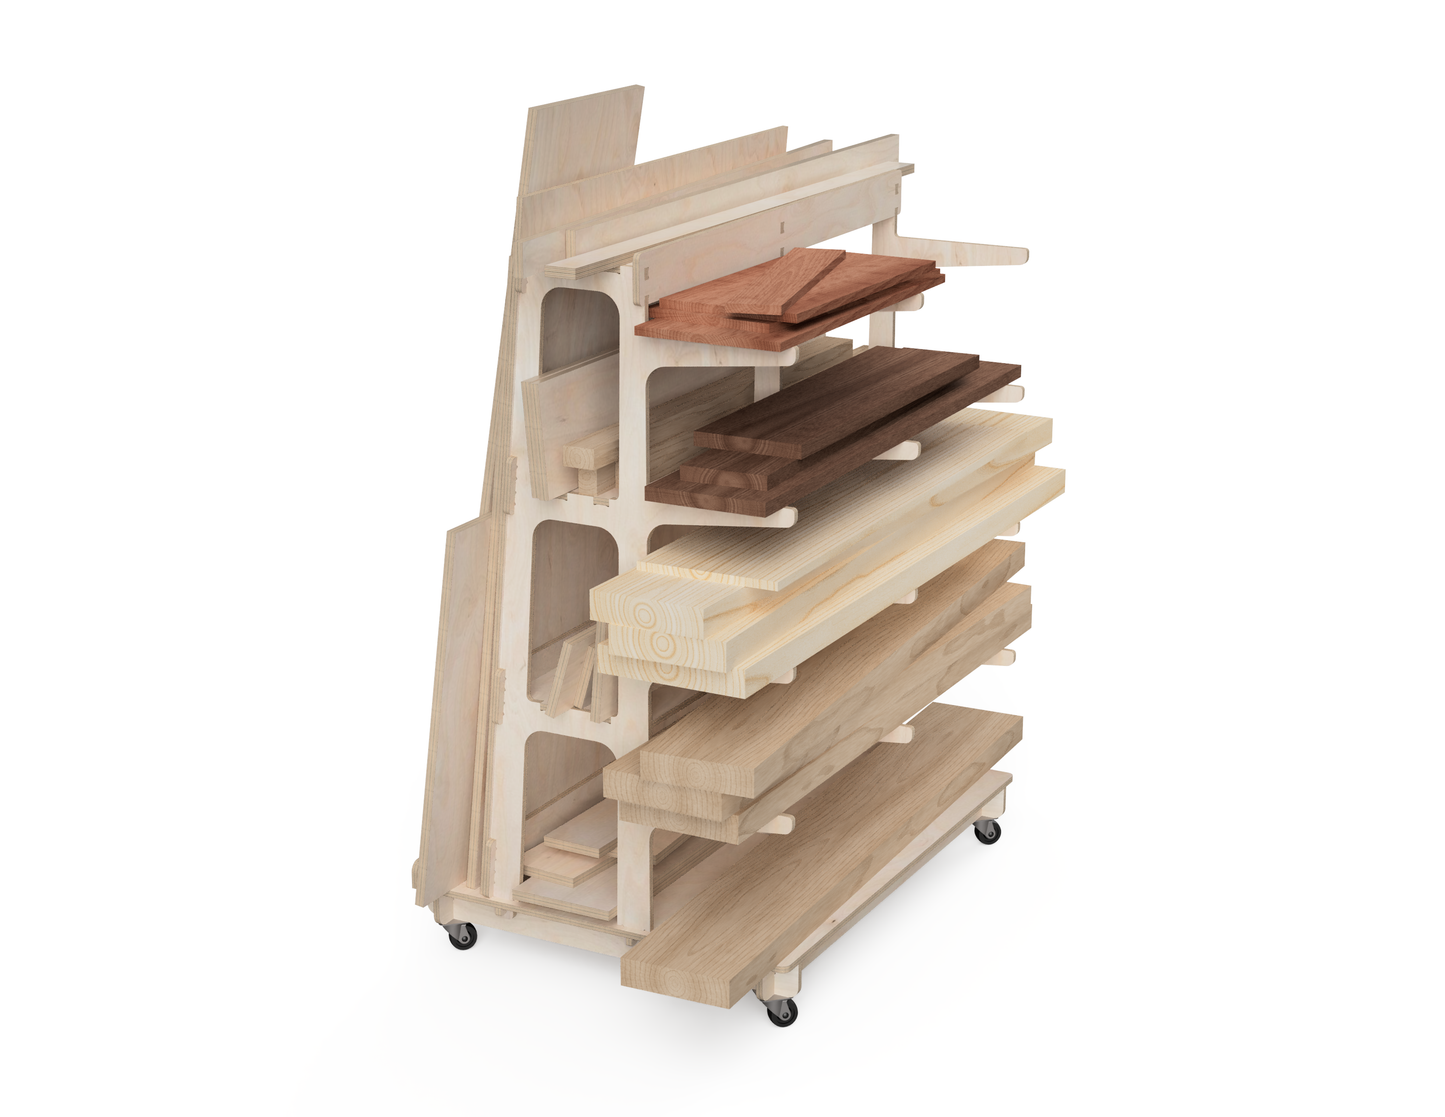 Material Storage Stand - Woodworker DXF files